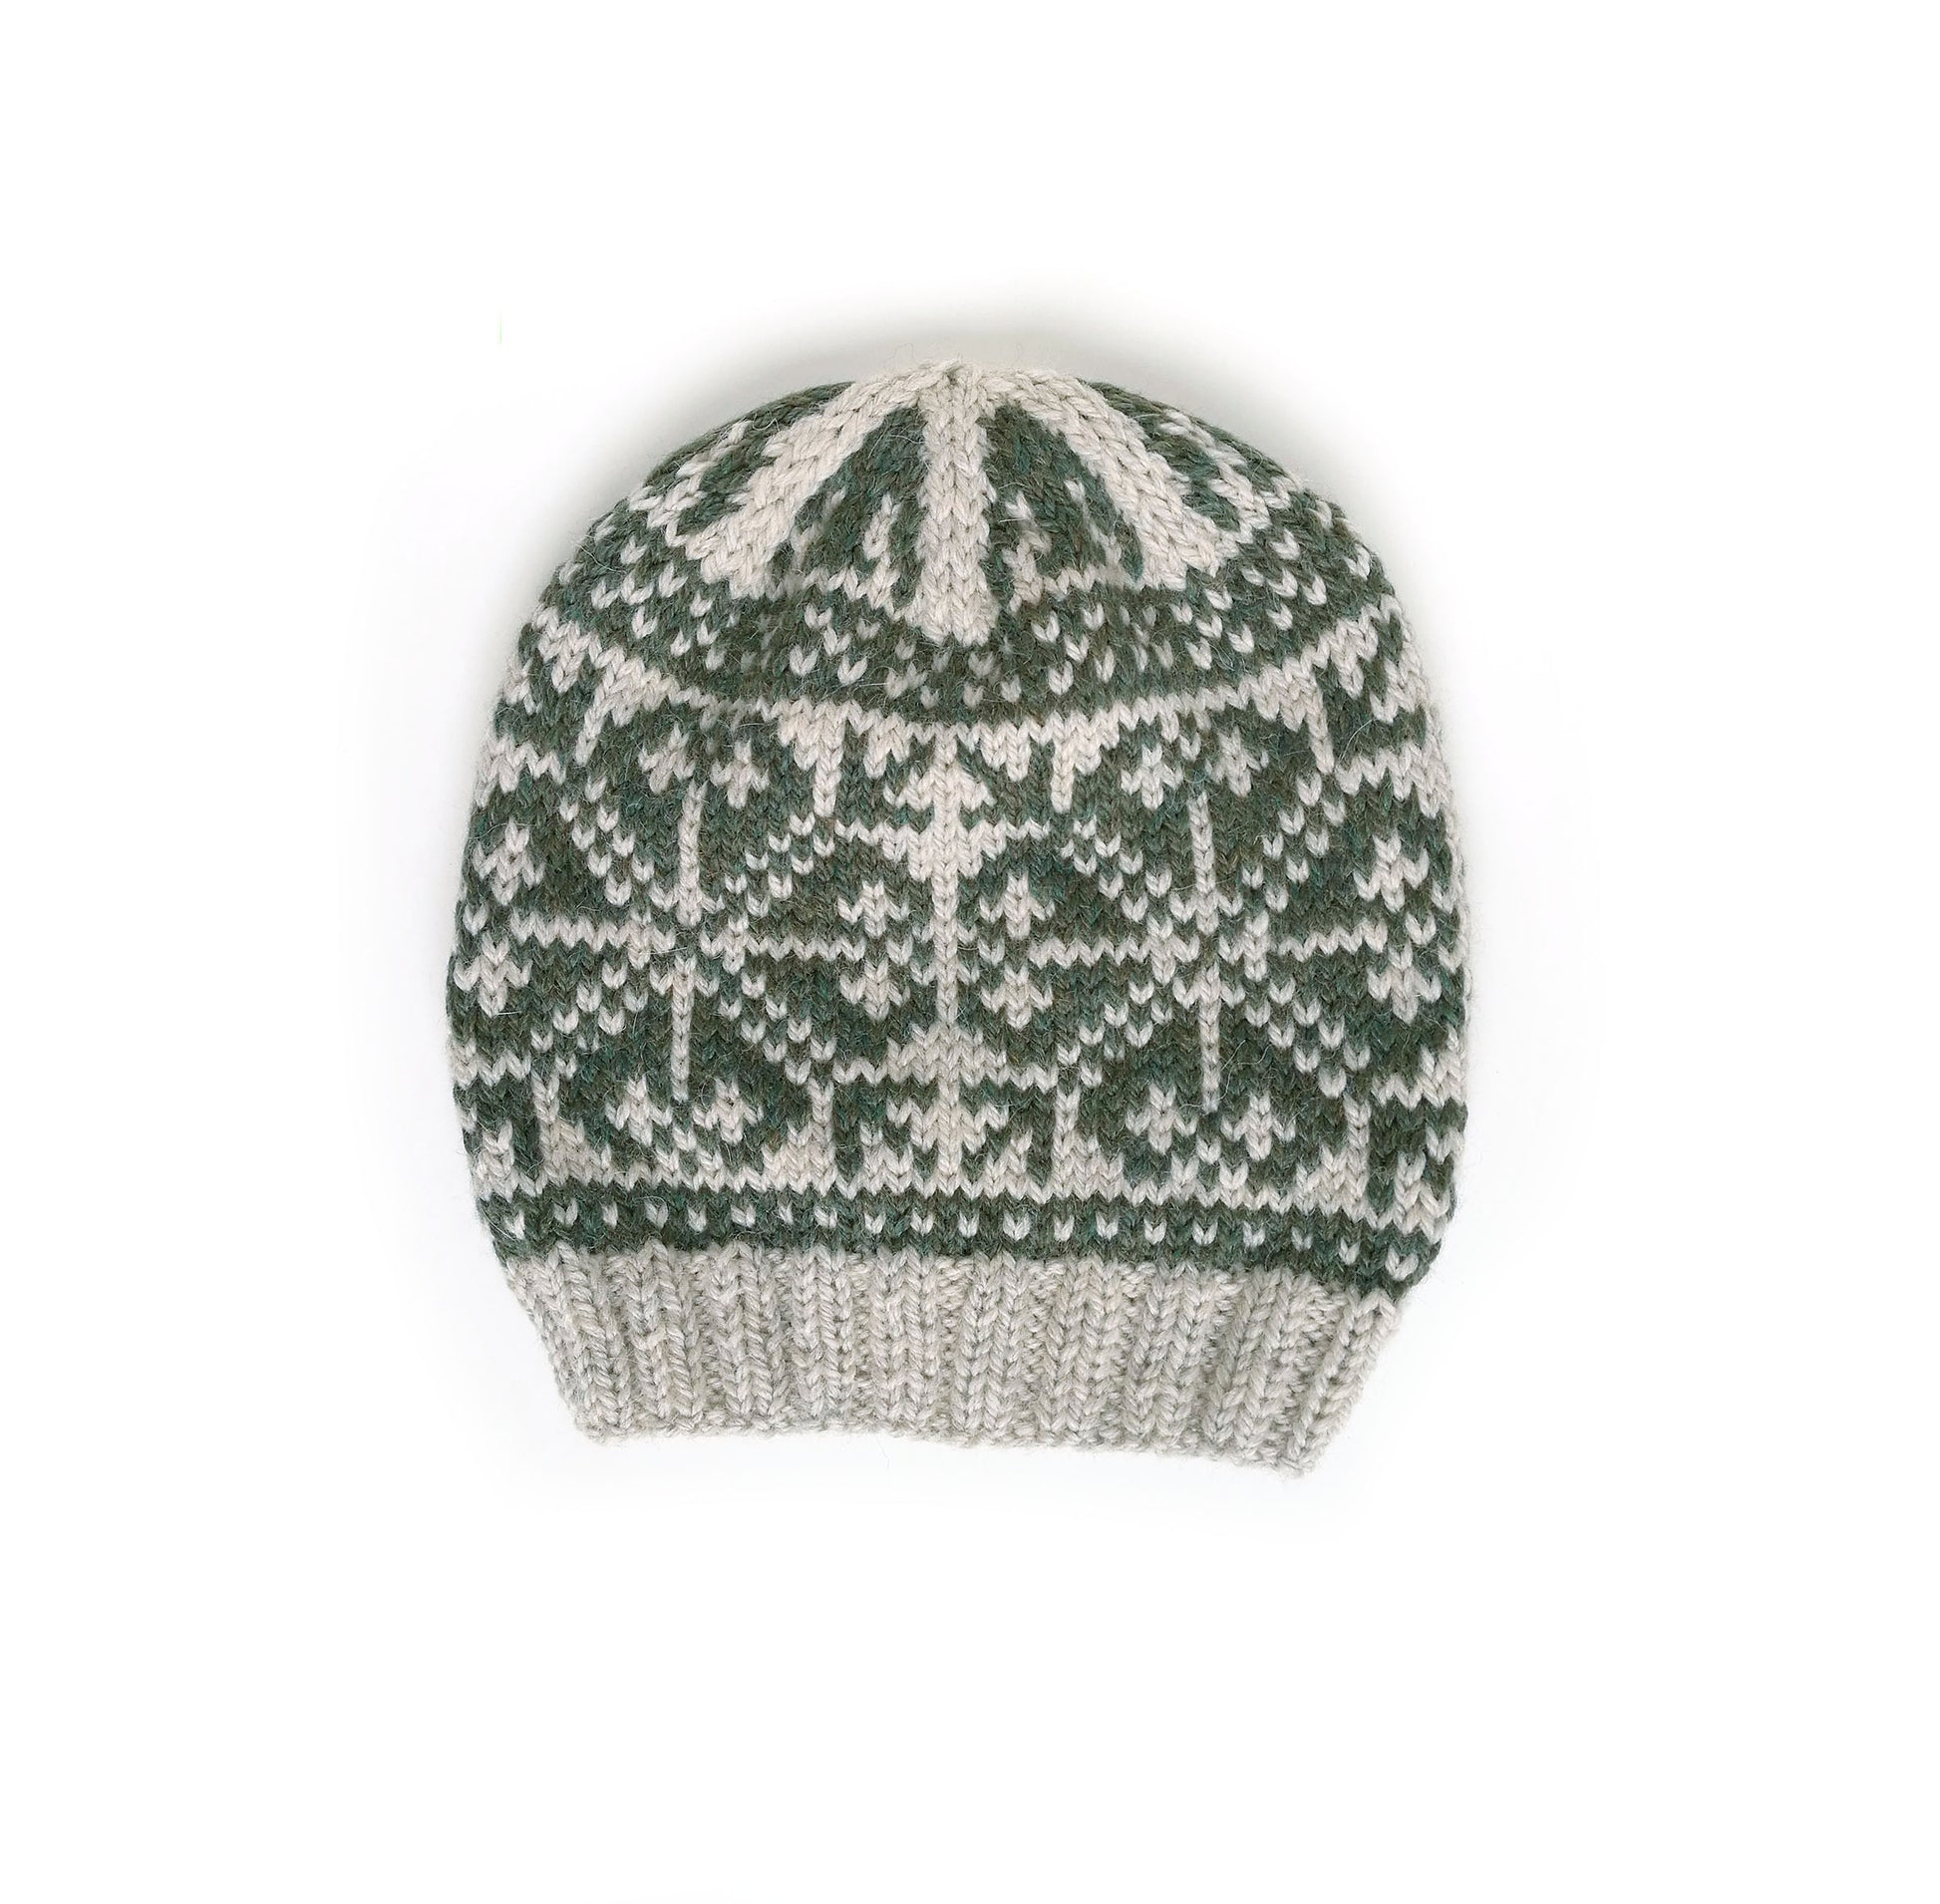 beige and green wool hand-knitted Fair Isle beanie hat in snowflake knitting pattern